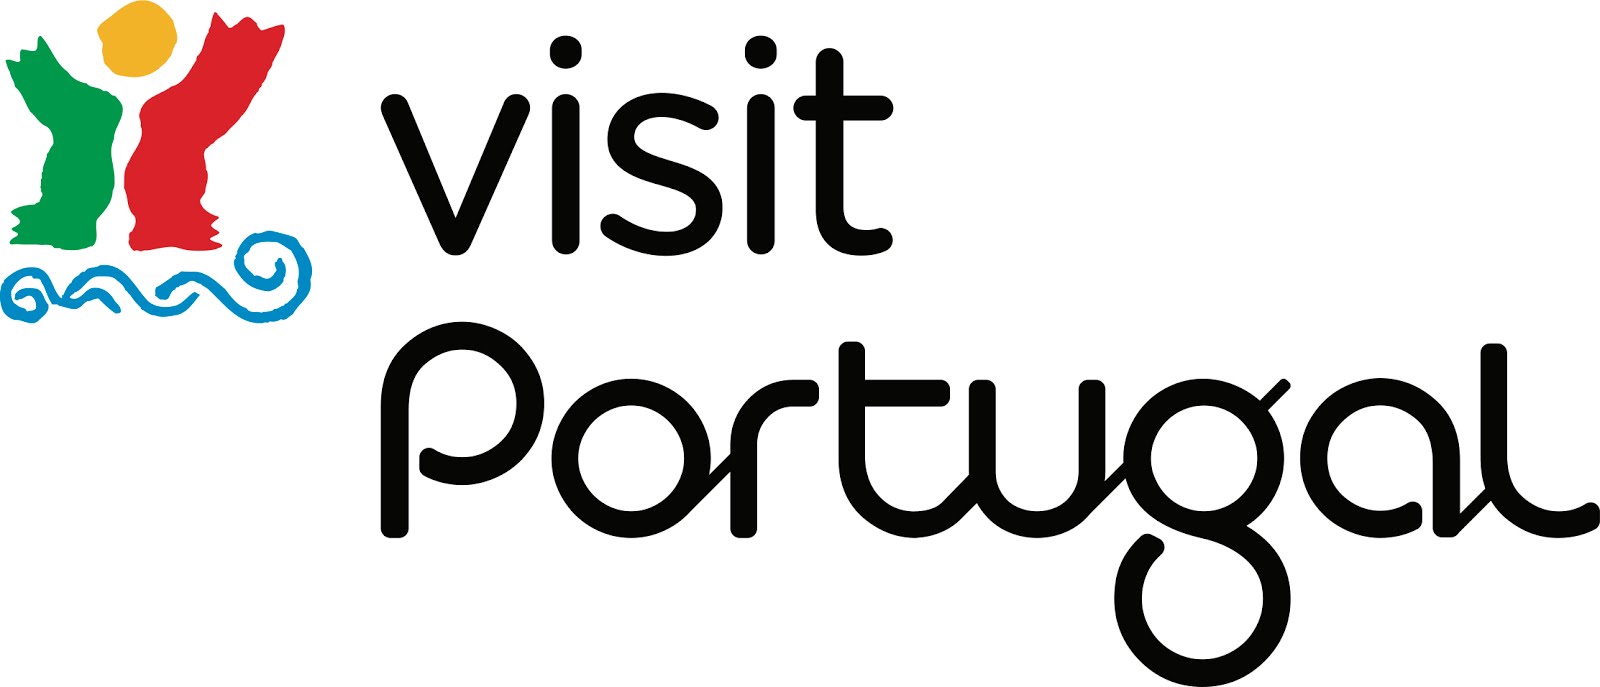 Official tourist information about Obidos